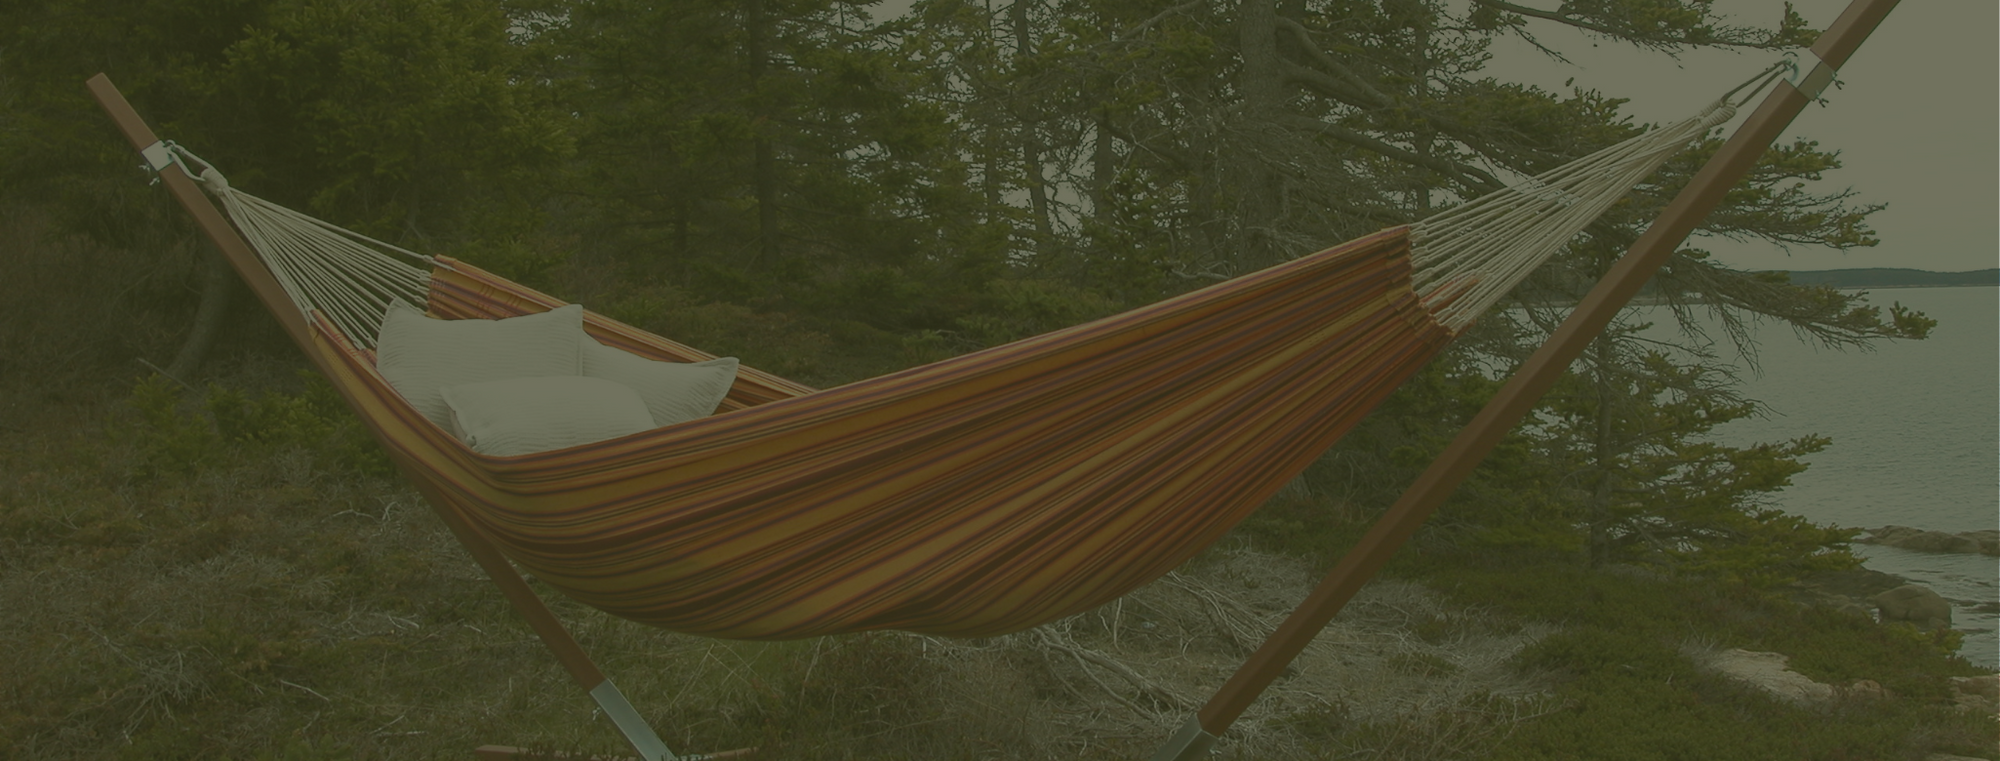 Winter is coming.  Tips on Taking Care of Your Hammock During the Cold Season.